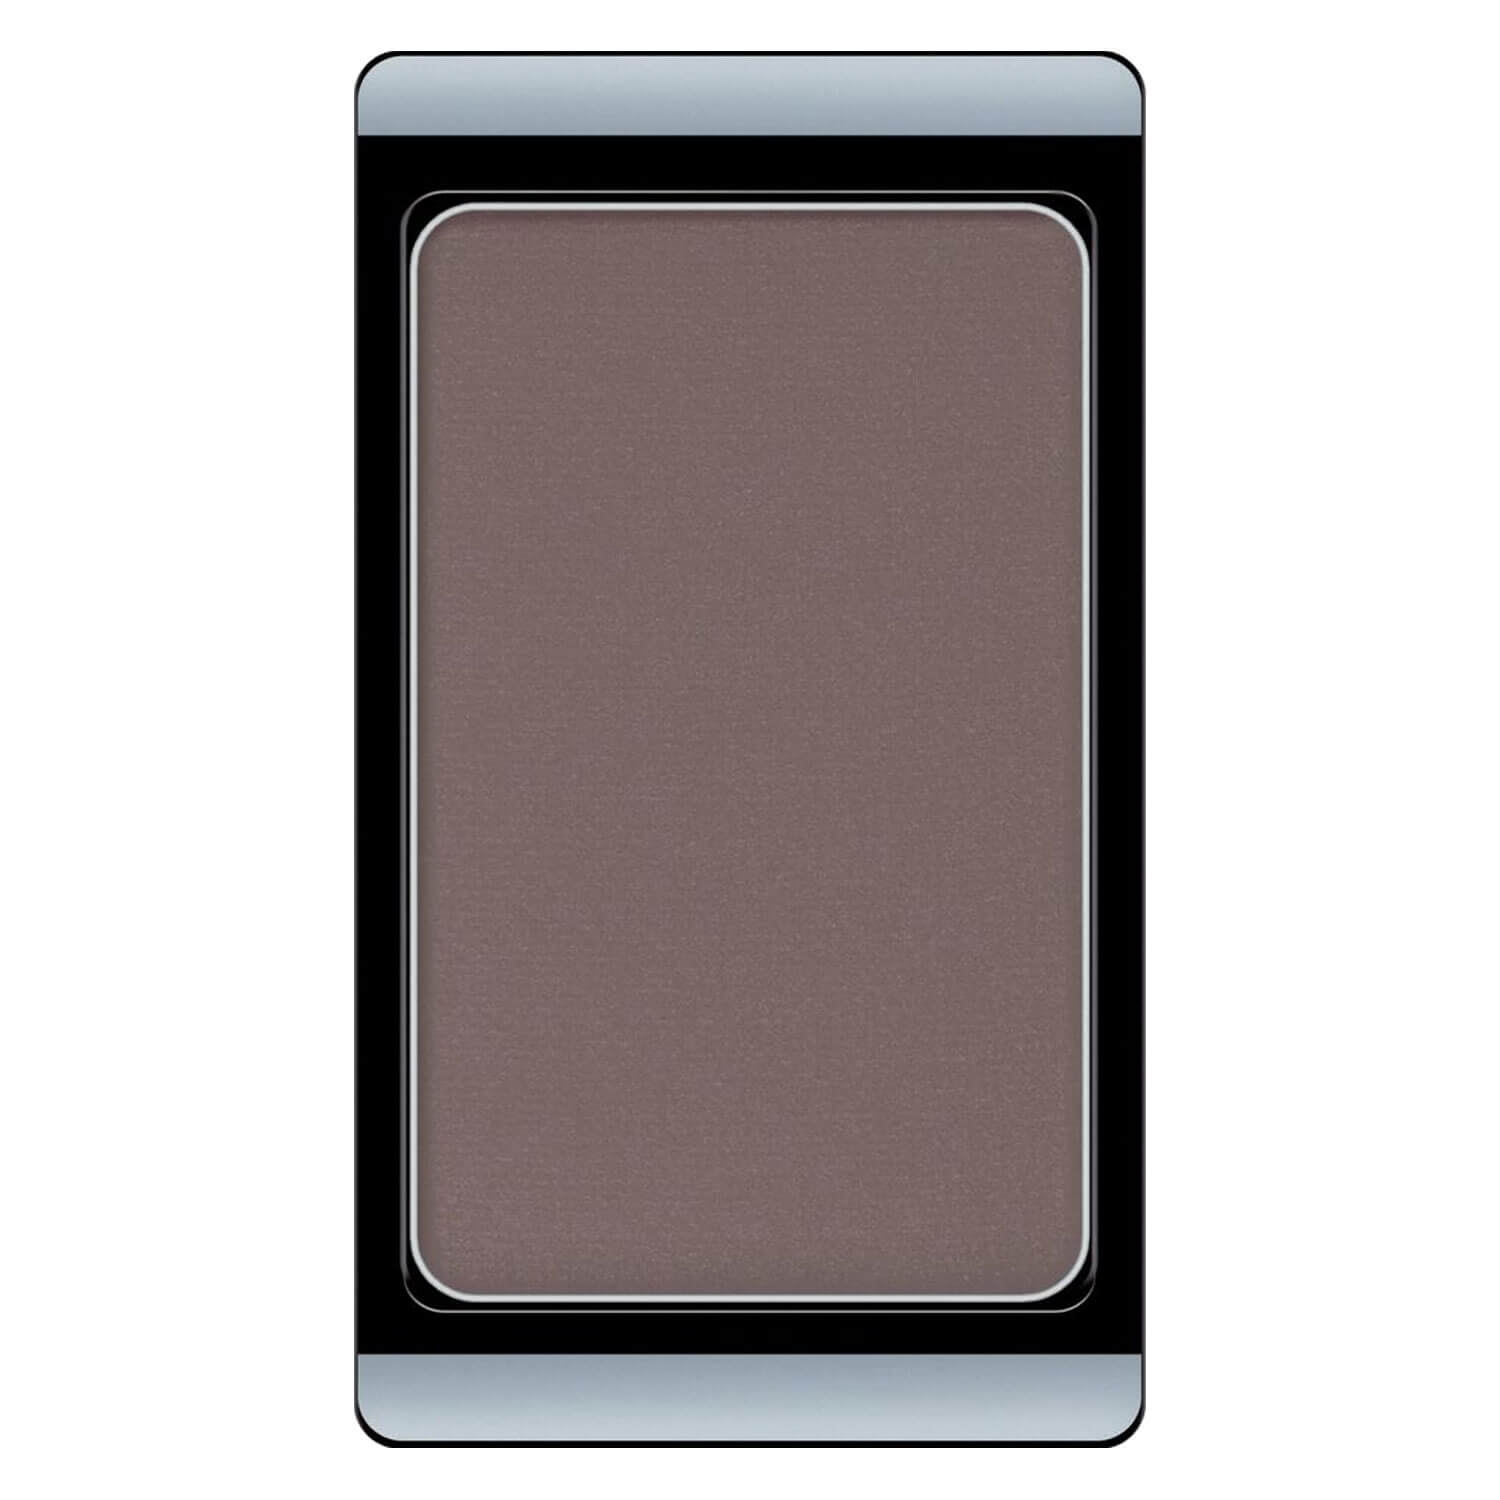 Product image from Artdeco Brows - Eye Brow Powder Brown 3